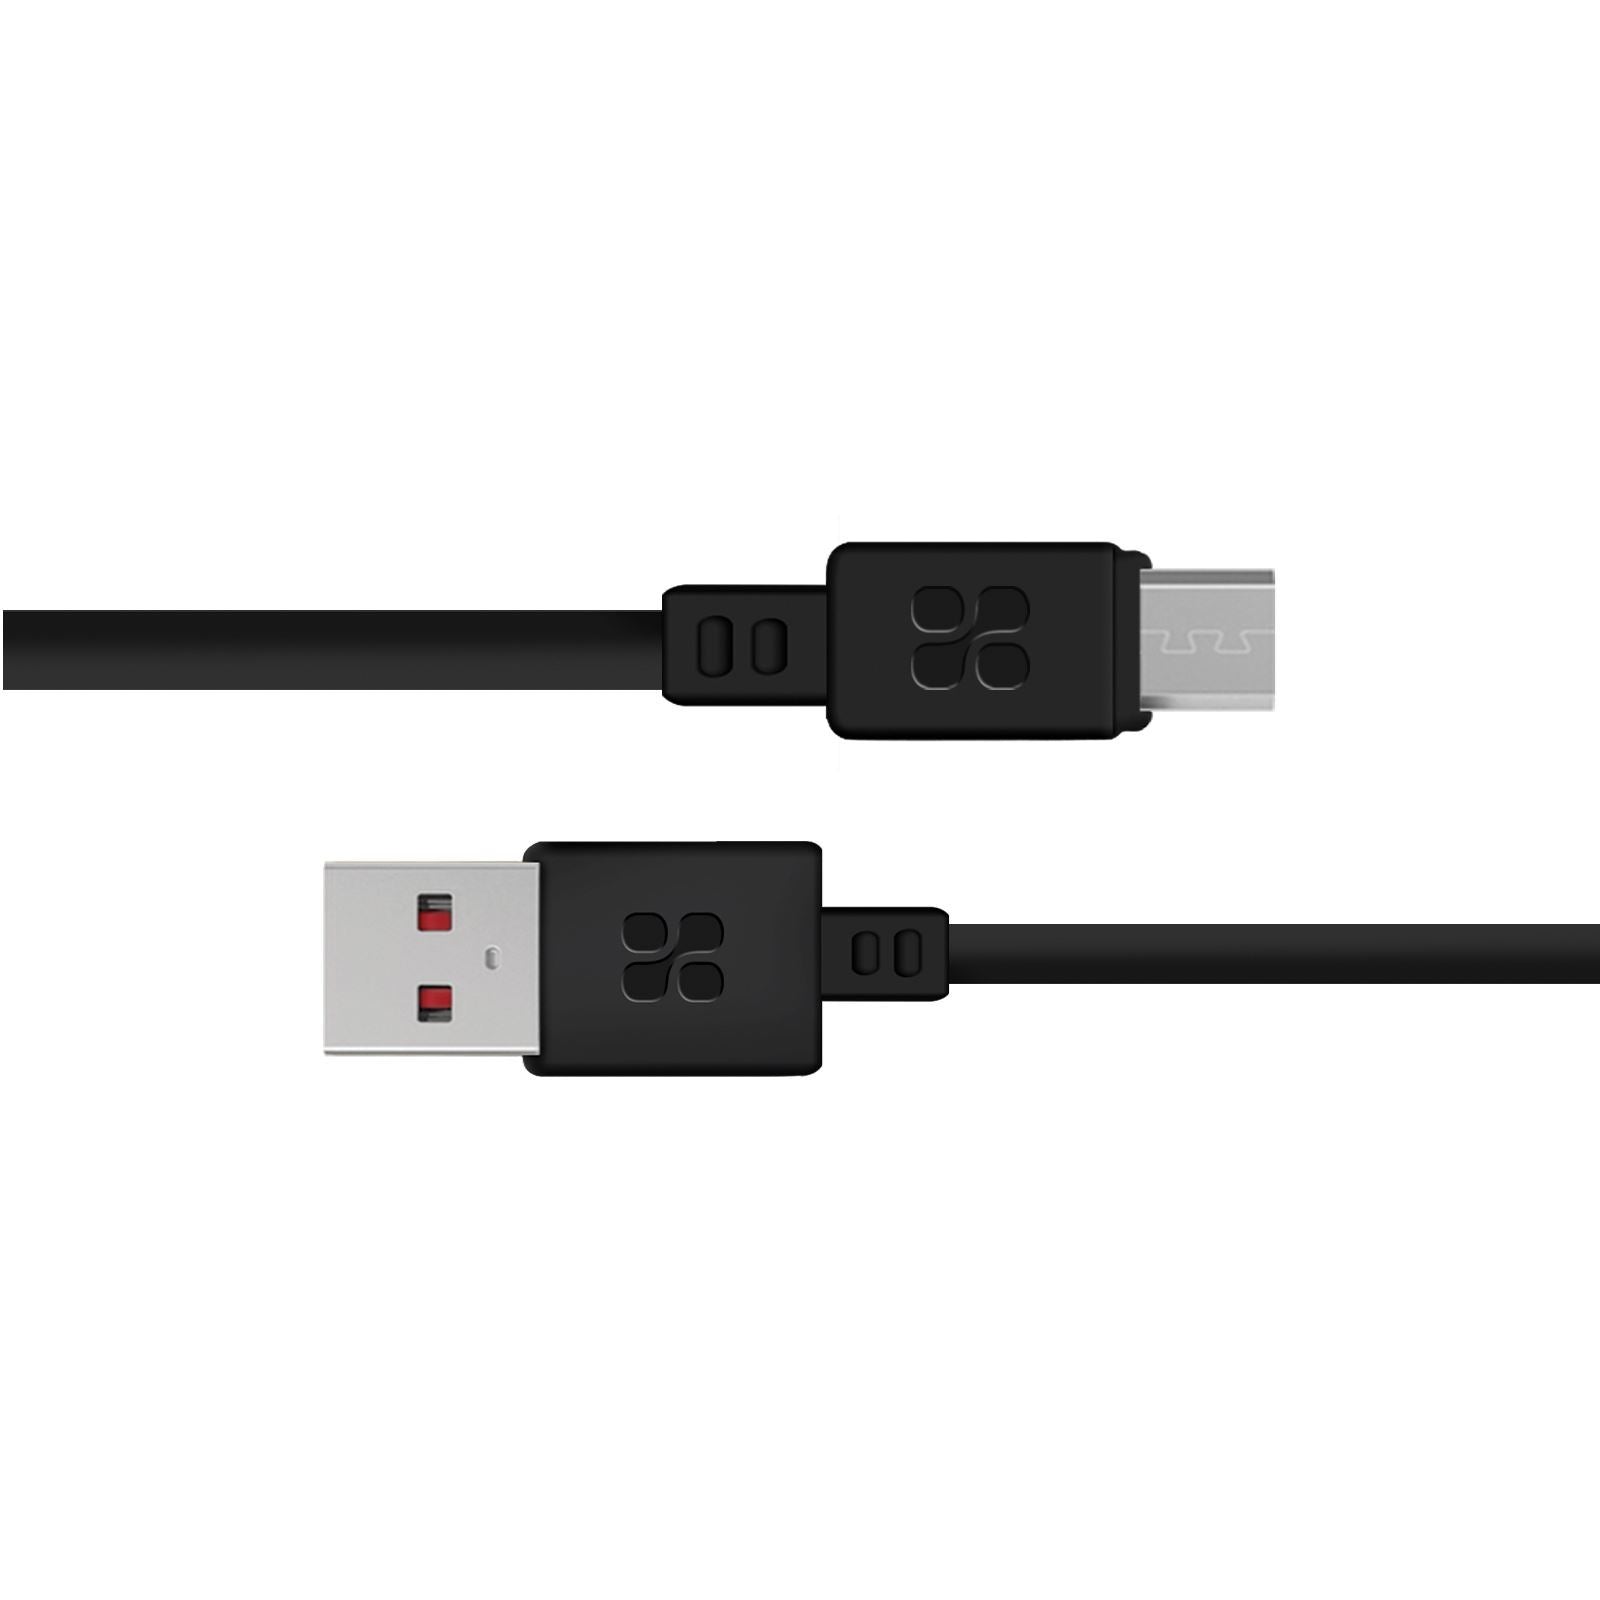 PROMATE_2m_USB-A_to_Micro_USB_Data_&_Charge_Cable._Transfer_Rate_480Mbps,_Super_Durable_&_Highly_Flexible._Black_Colour. 1516